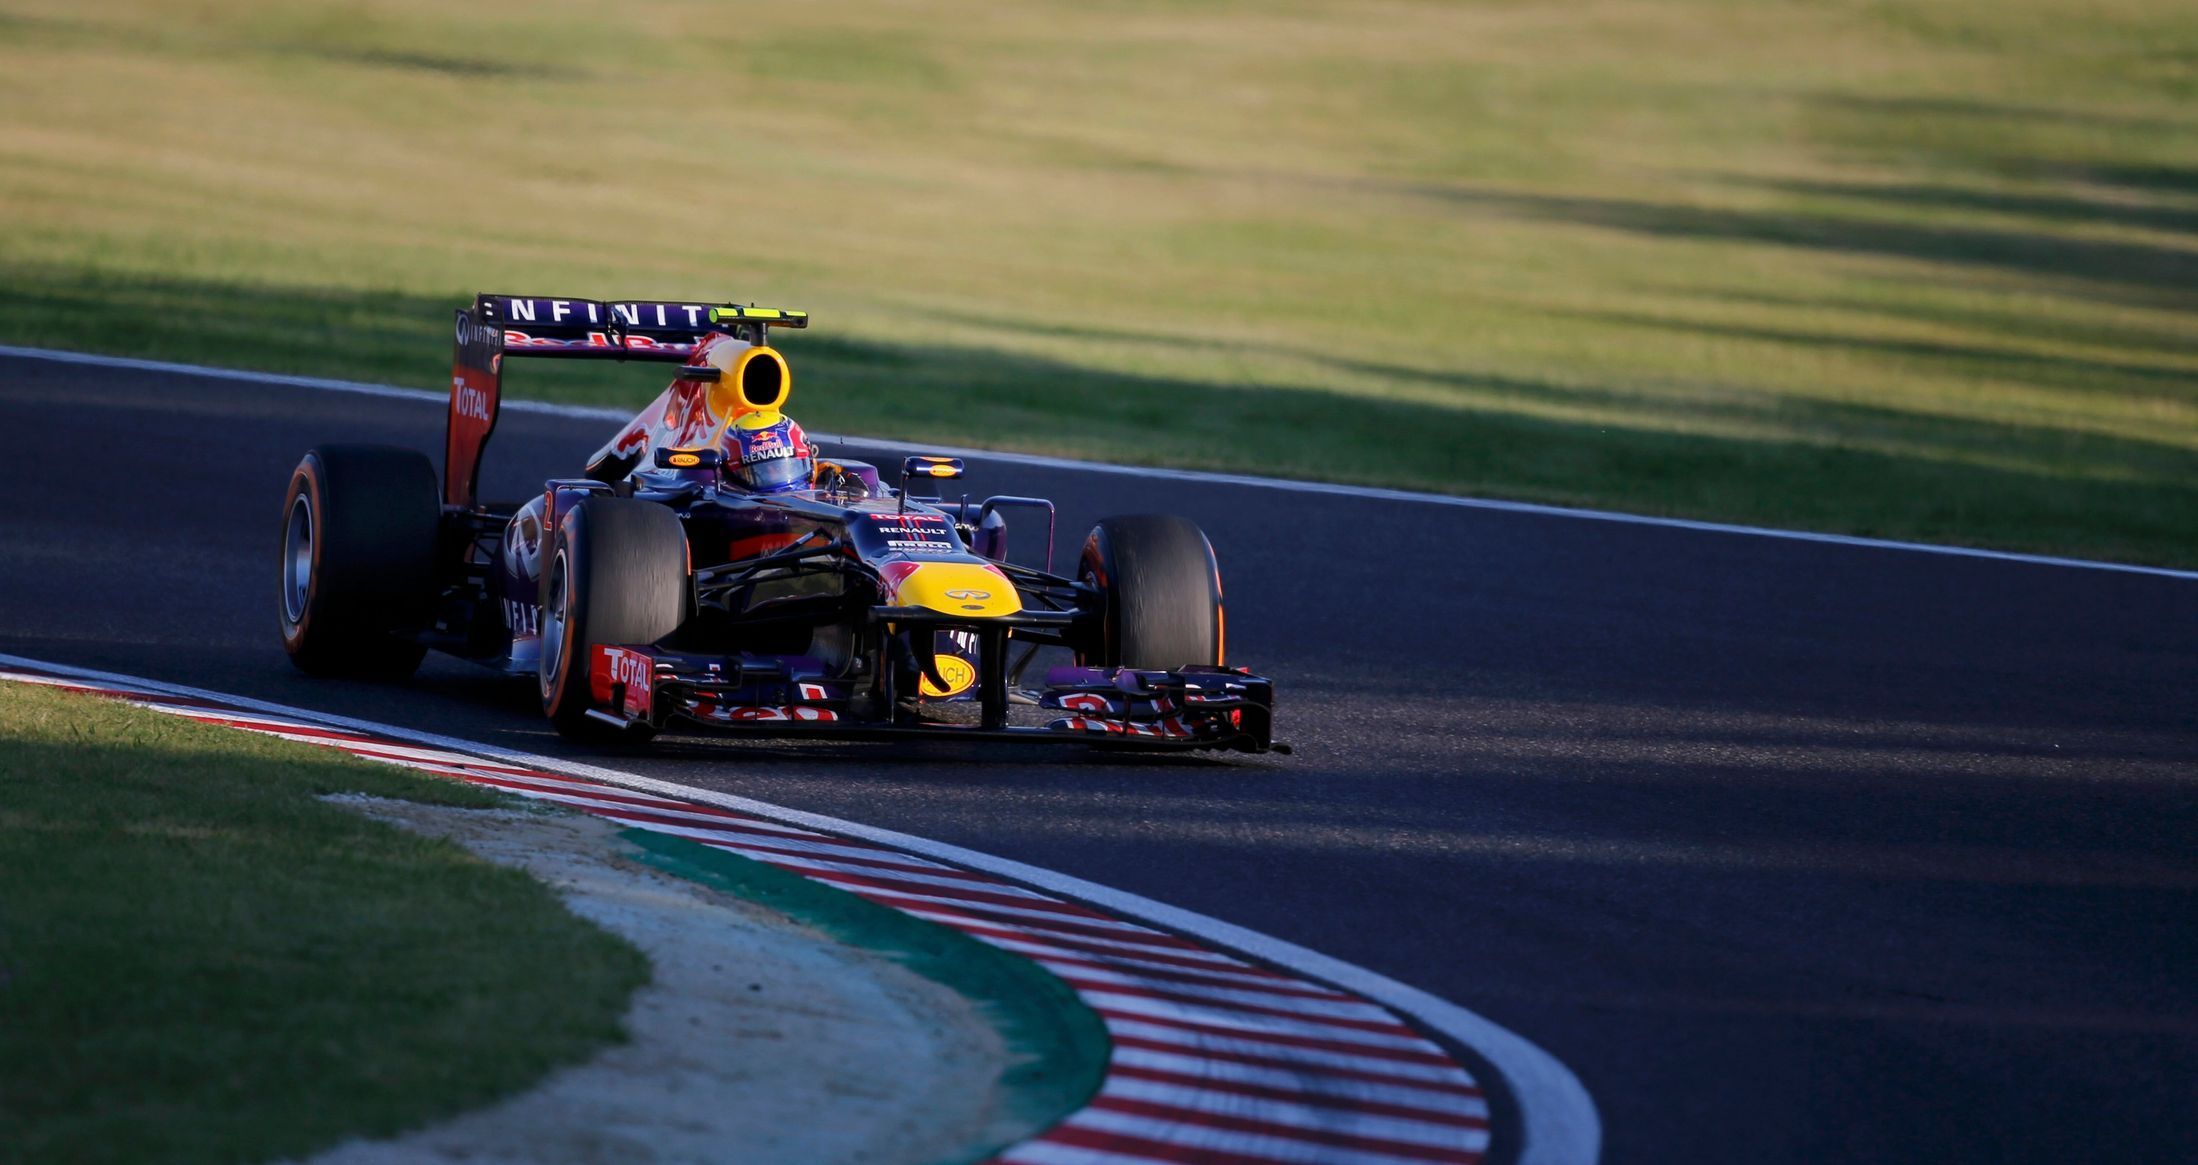 Red Bull Formula One driver Webber of Australia races during the Japanese F1 Grand Prix at the Suzuka circuit